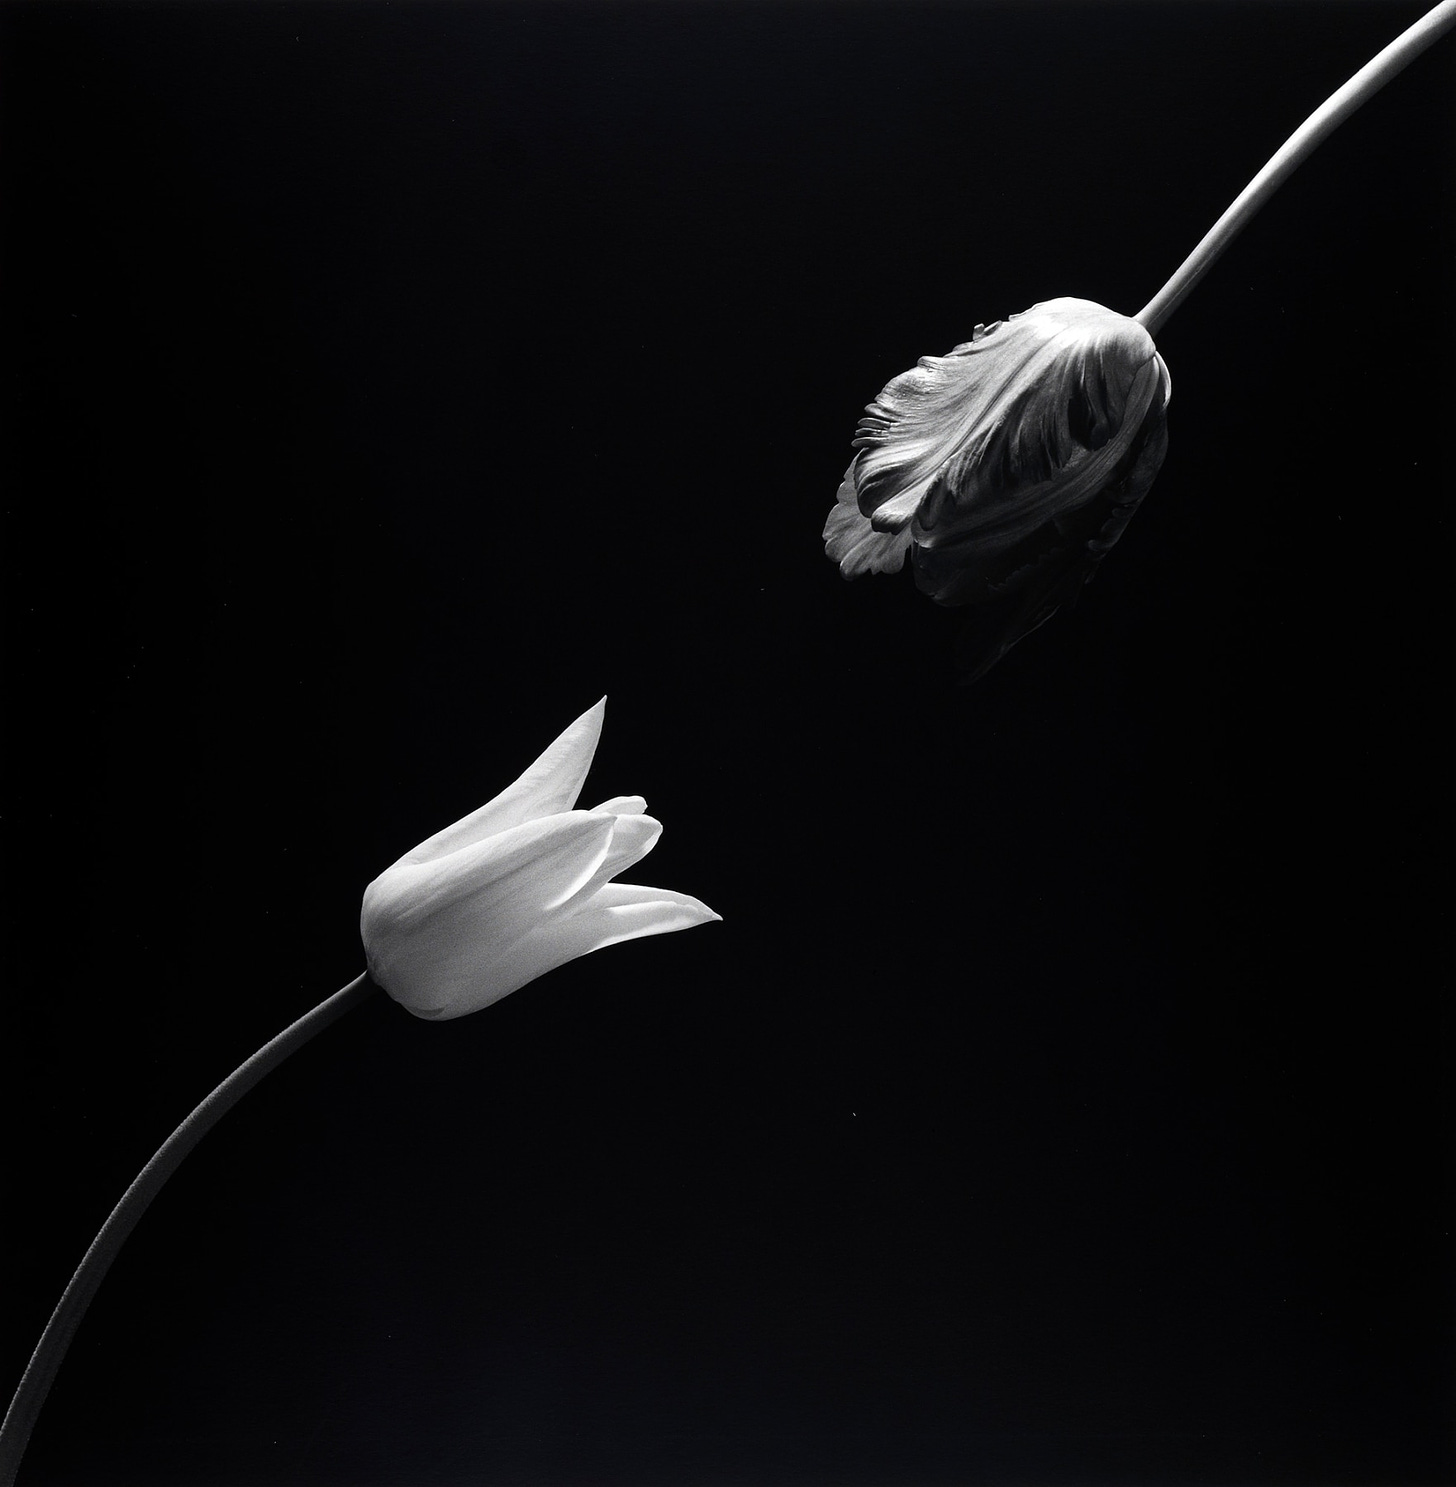 Black and white photograph of two tulips, one emerging from the top right corner, another from the bottom left corner